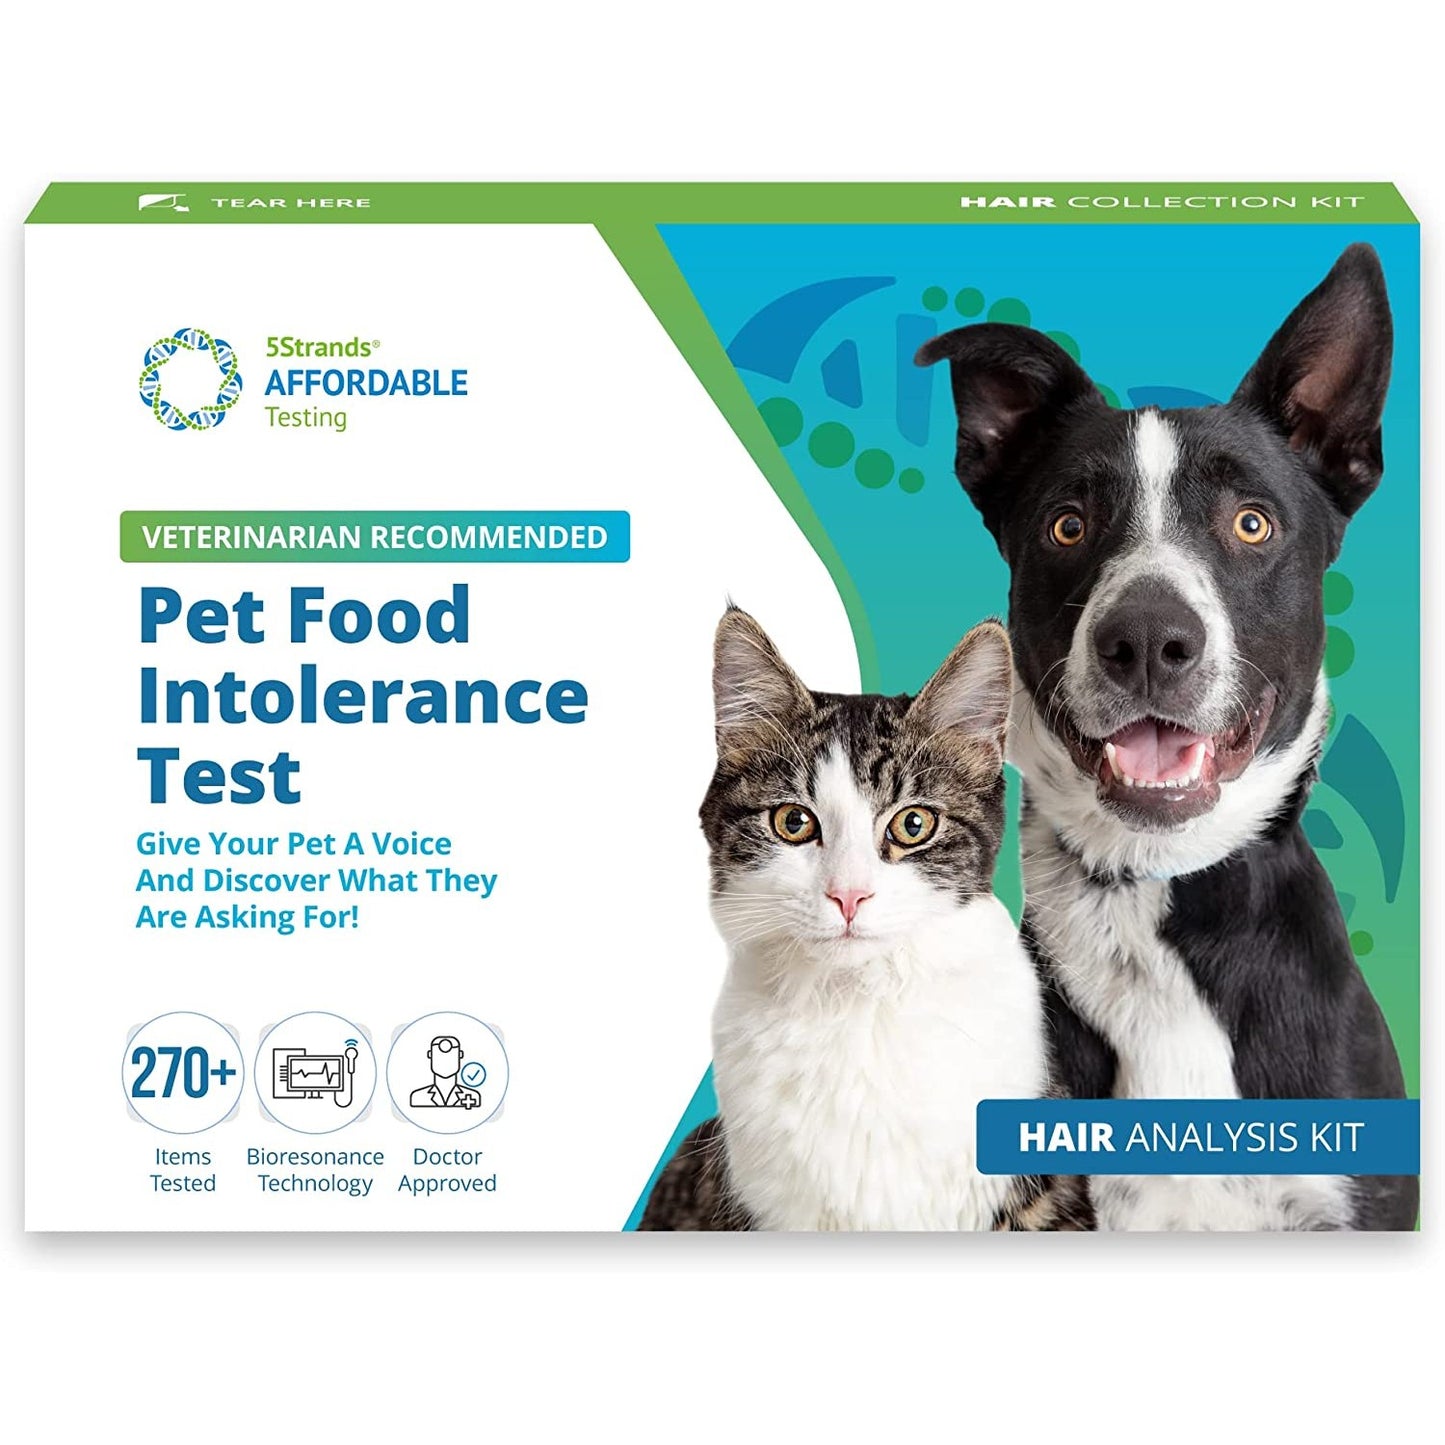 Pet food intolerance test for cats and dogs.